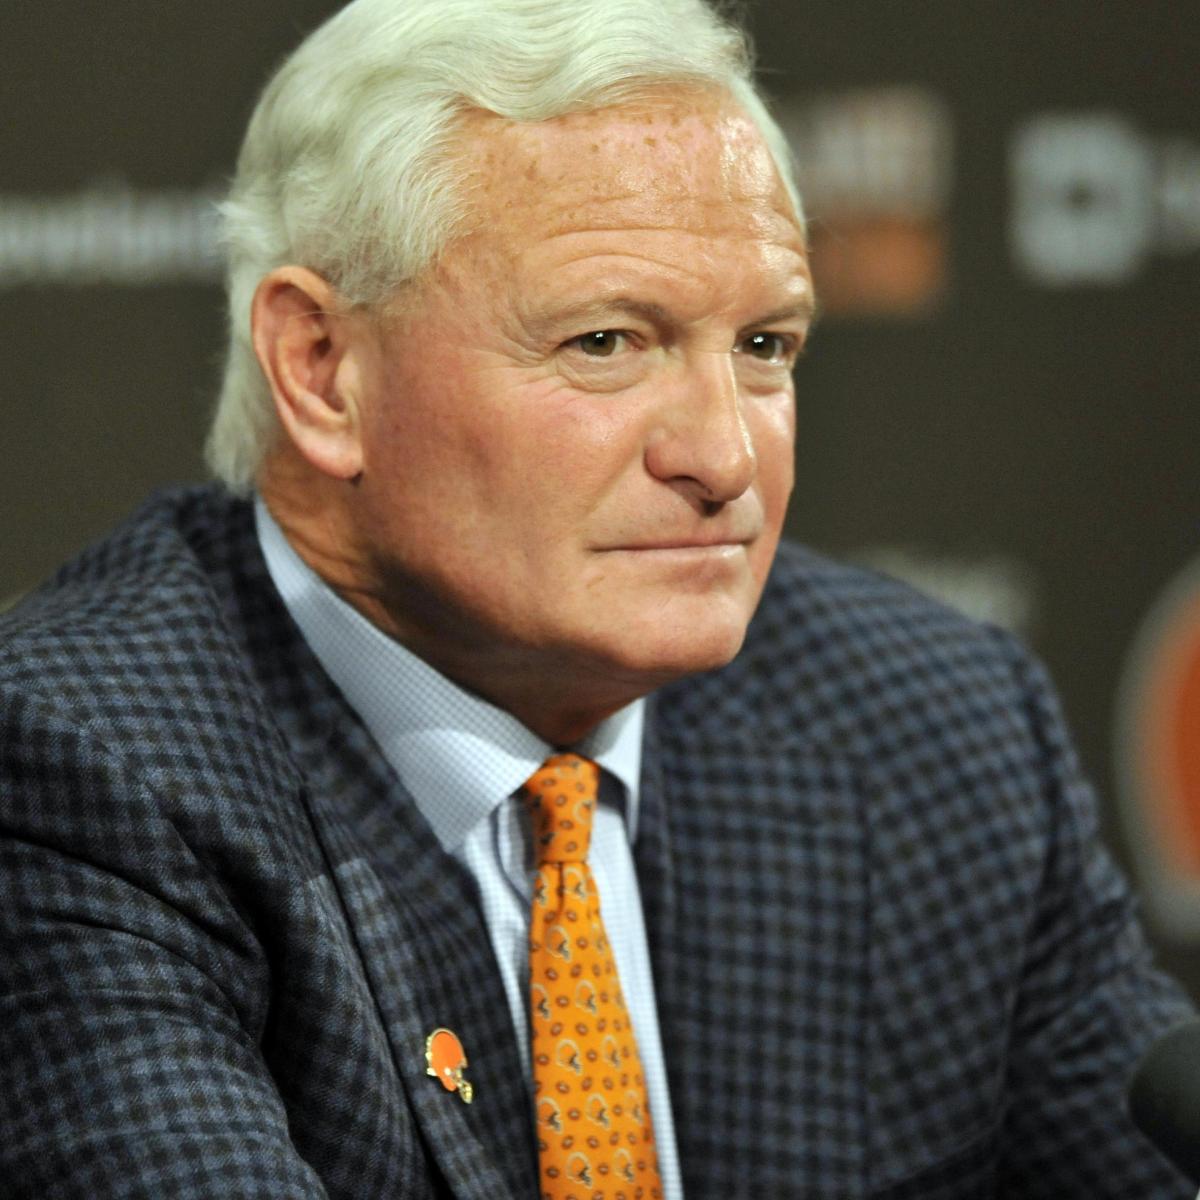 A Homeless Person Reportedly Told Browns' Jimmy Haslam to Draft Johnny Manziel ...1200 x 1200